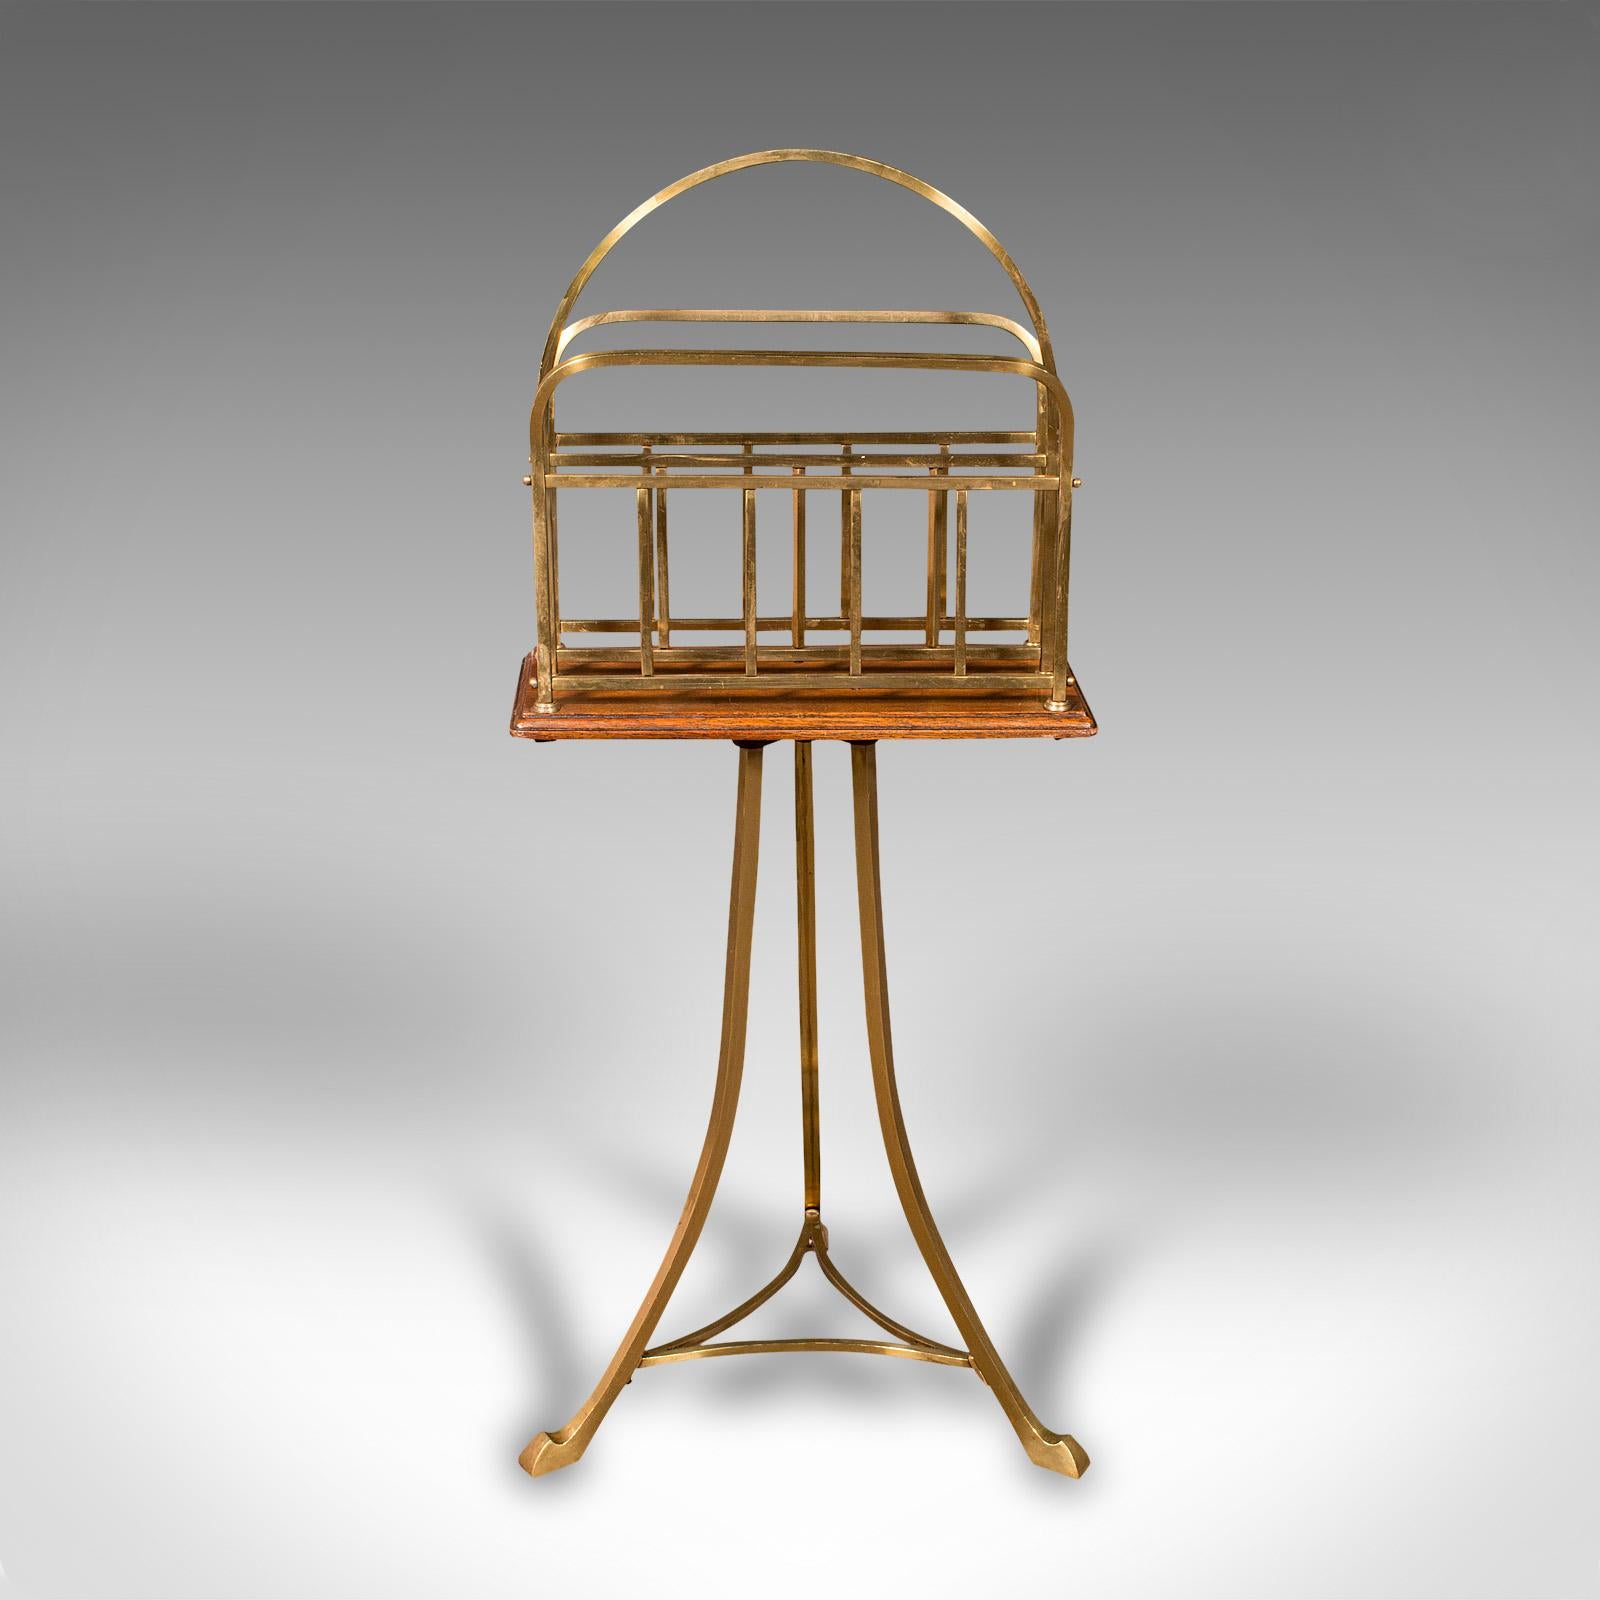 This is an antique newspaper stand. An English, oak and brass magazine or music rack, dating to the late Victorian period, circa 1900.

Elegant antique newspaper stand, ideal for the lounge or study
Displays a desirable aged patina and in good